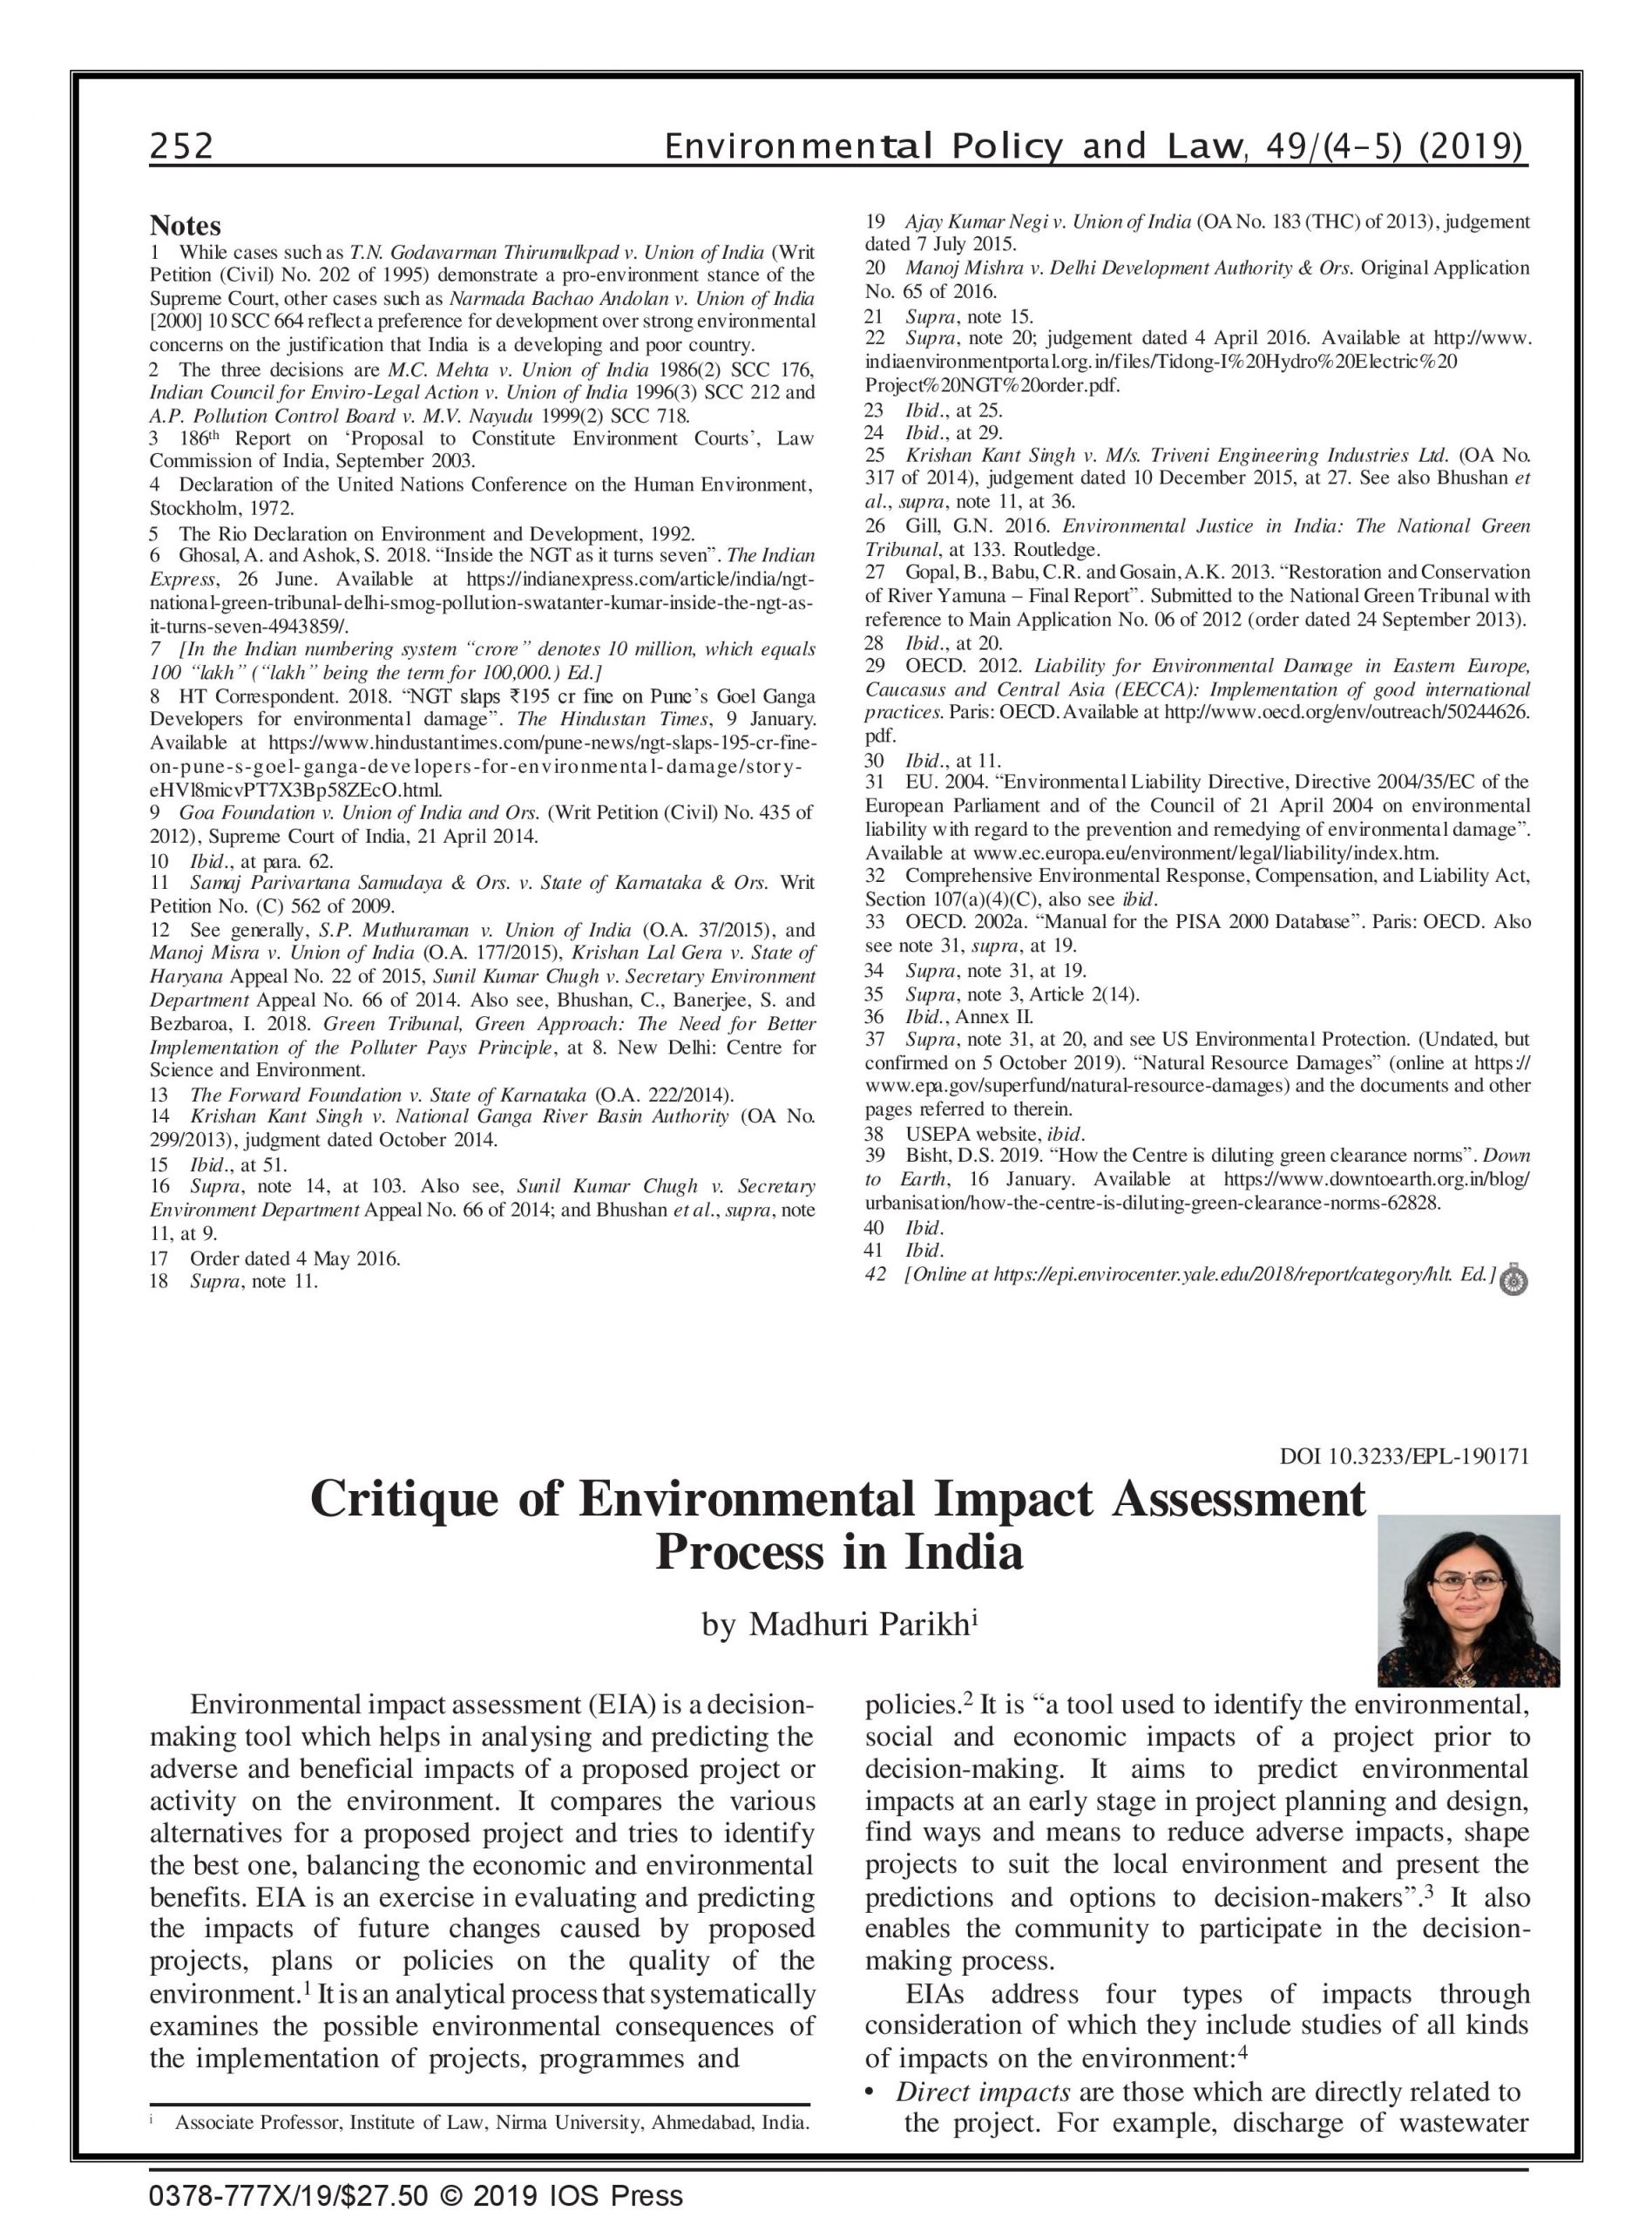 Critique of Environmental Impact Assessment process in India